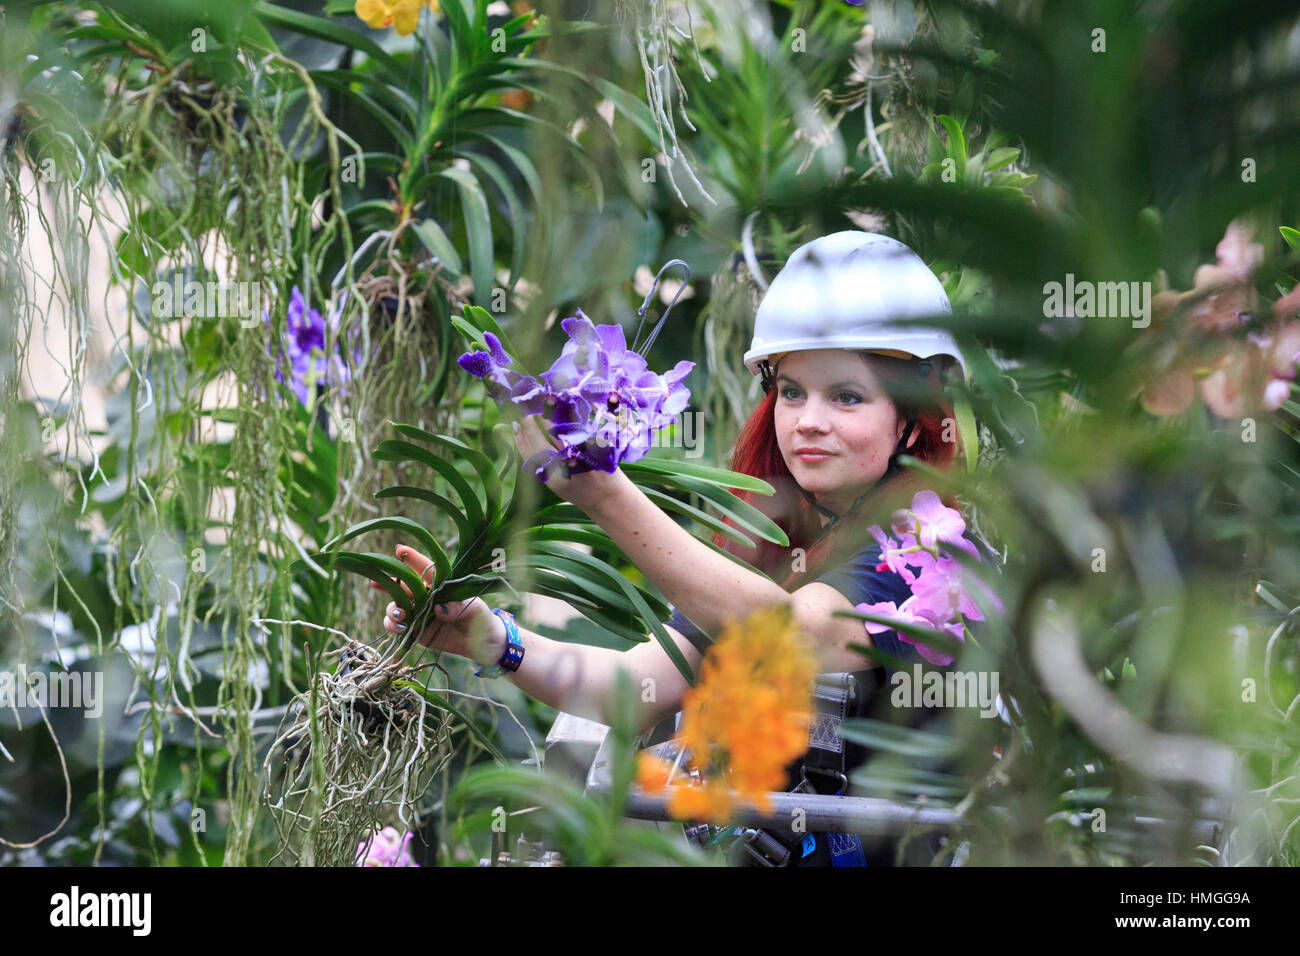 London, UK. 2 February 2017. Elisa Biondi, Princess of Wales Conservatory Manager and Festival creator with vanda orchids. Press preview of the Kew Gardens 2017 Orchids Festival which opens to the public on Saturday, 4 February in the Princess of Wales Conservatory. The 22nd annual Kew Orchid Festival is a colourful celebration of India's vibrant plants and culture. It took Kew staff and volunteers 1,600 hours to create. 3,600 orchids are on display until 5 March 2017. Stock Photo